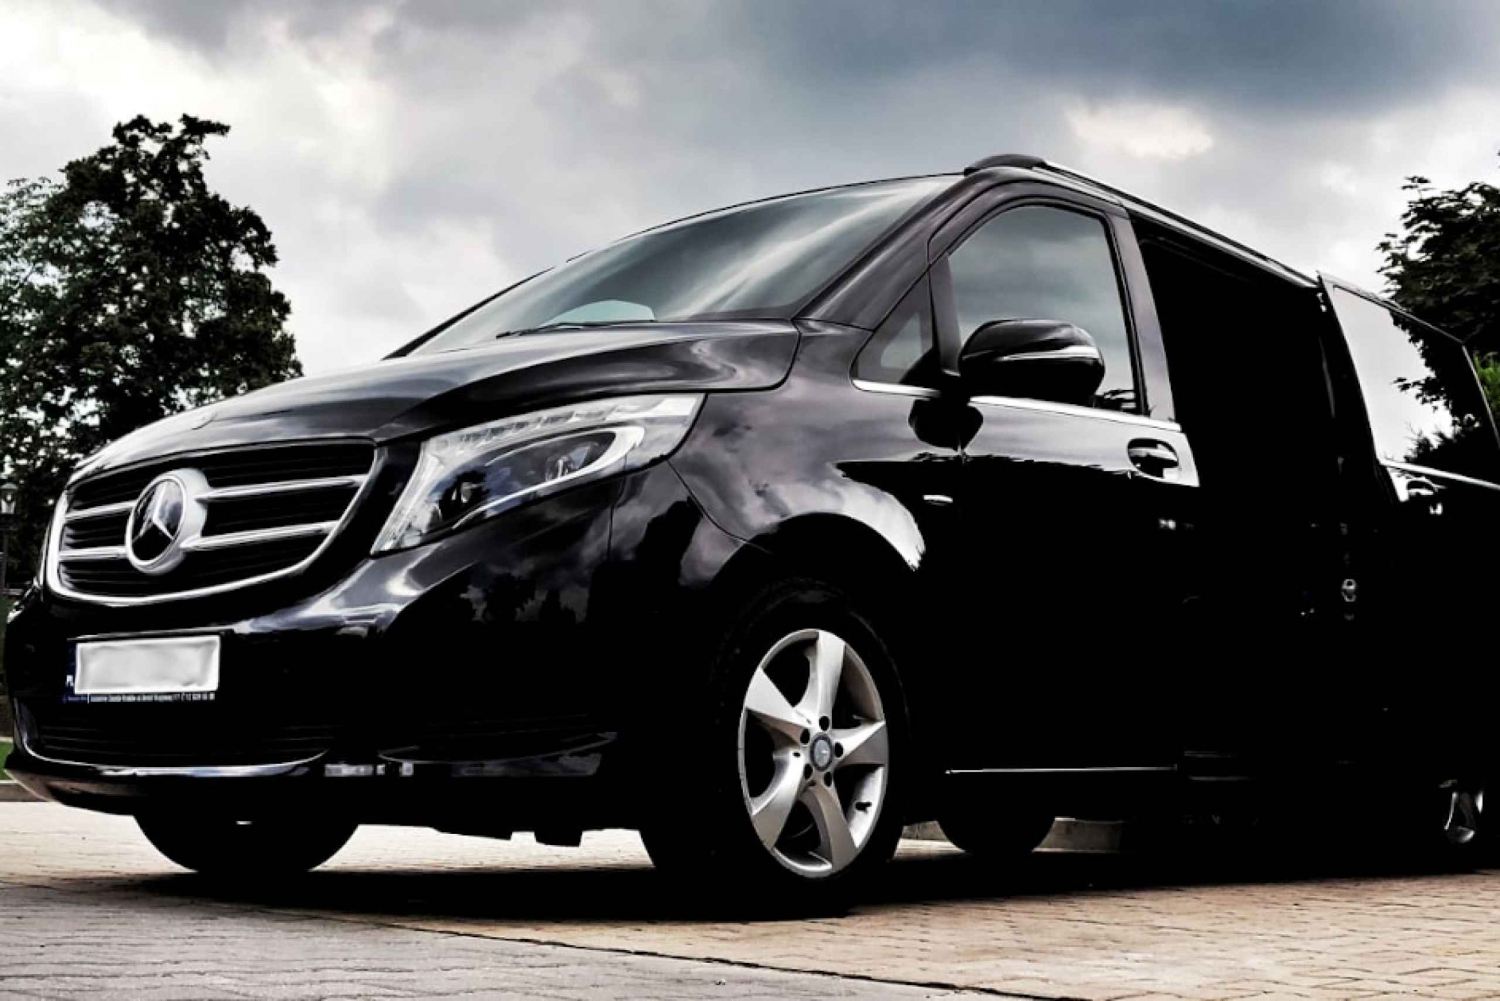 Katowice Airport: Private Transfer from/to Krakow